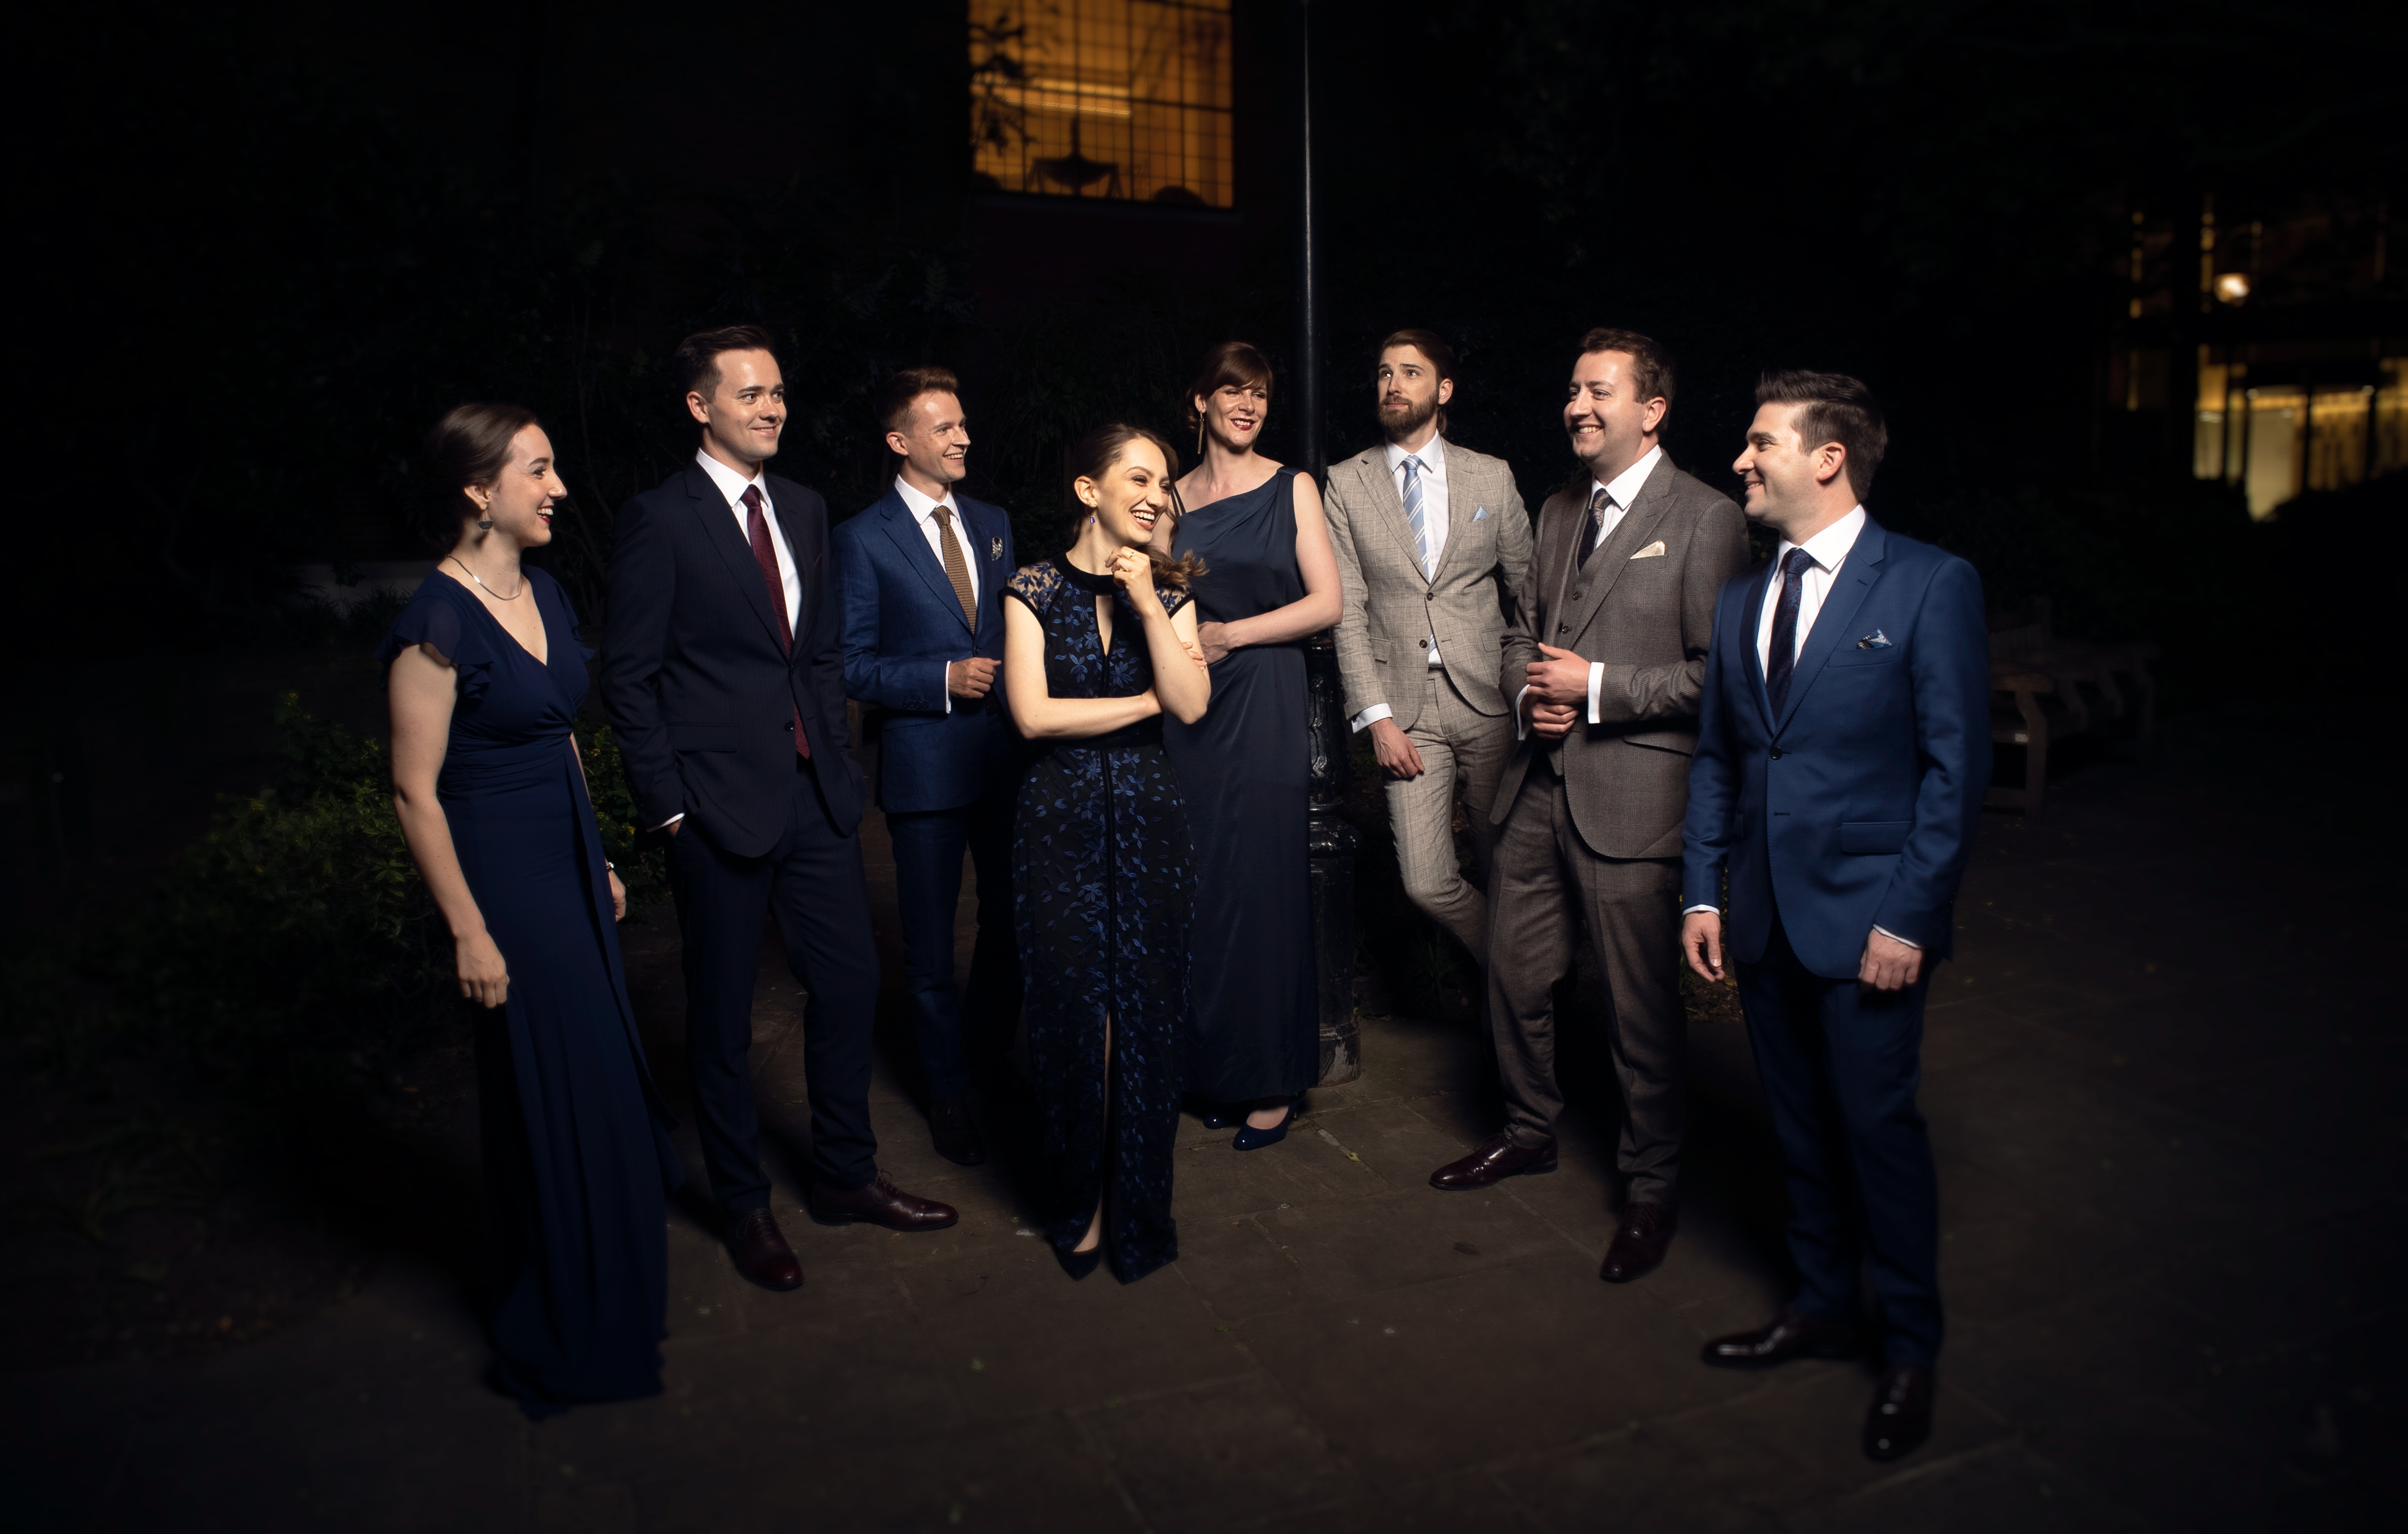 VOCES8 (Photo by Andy Staples)